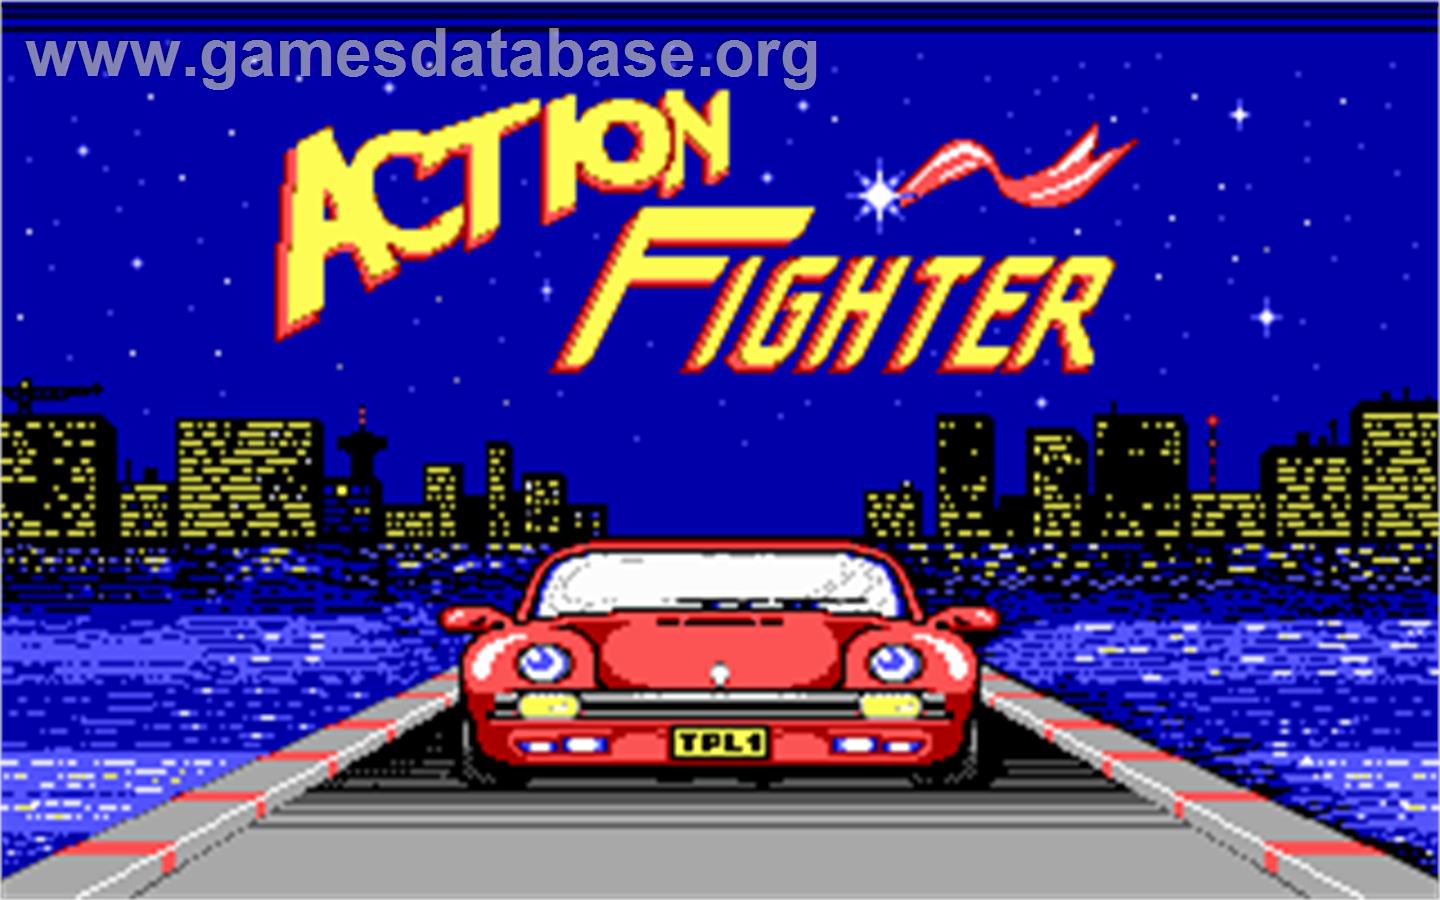 Action Fighter - Microsoft DOS - Artwork - In Game